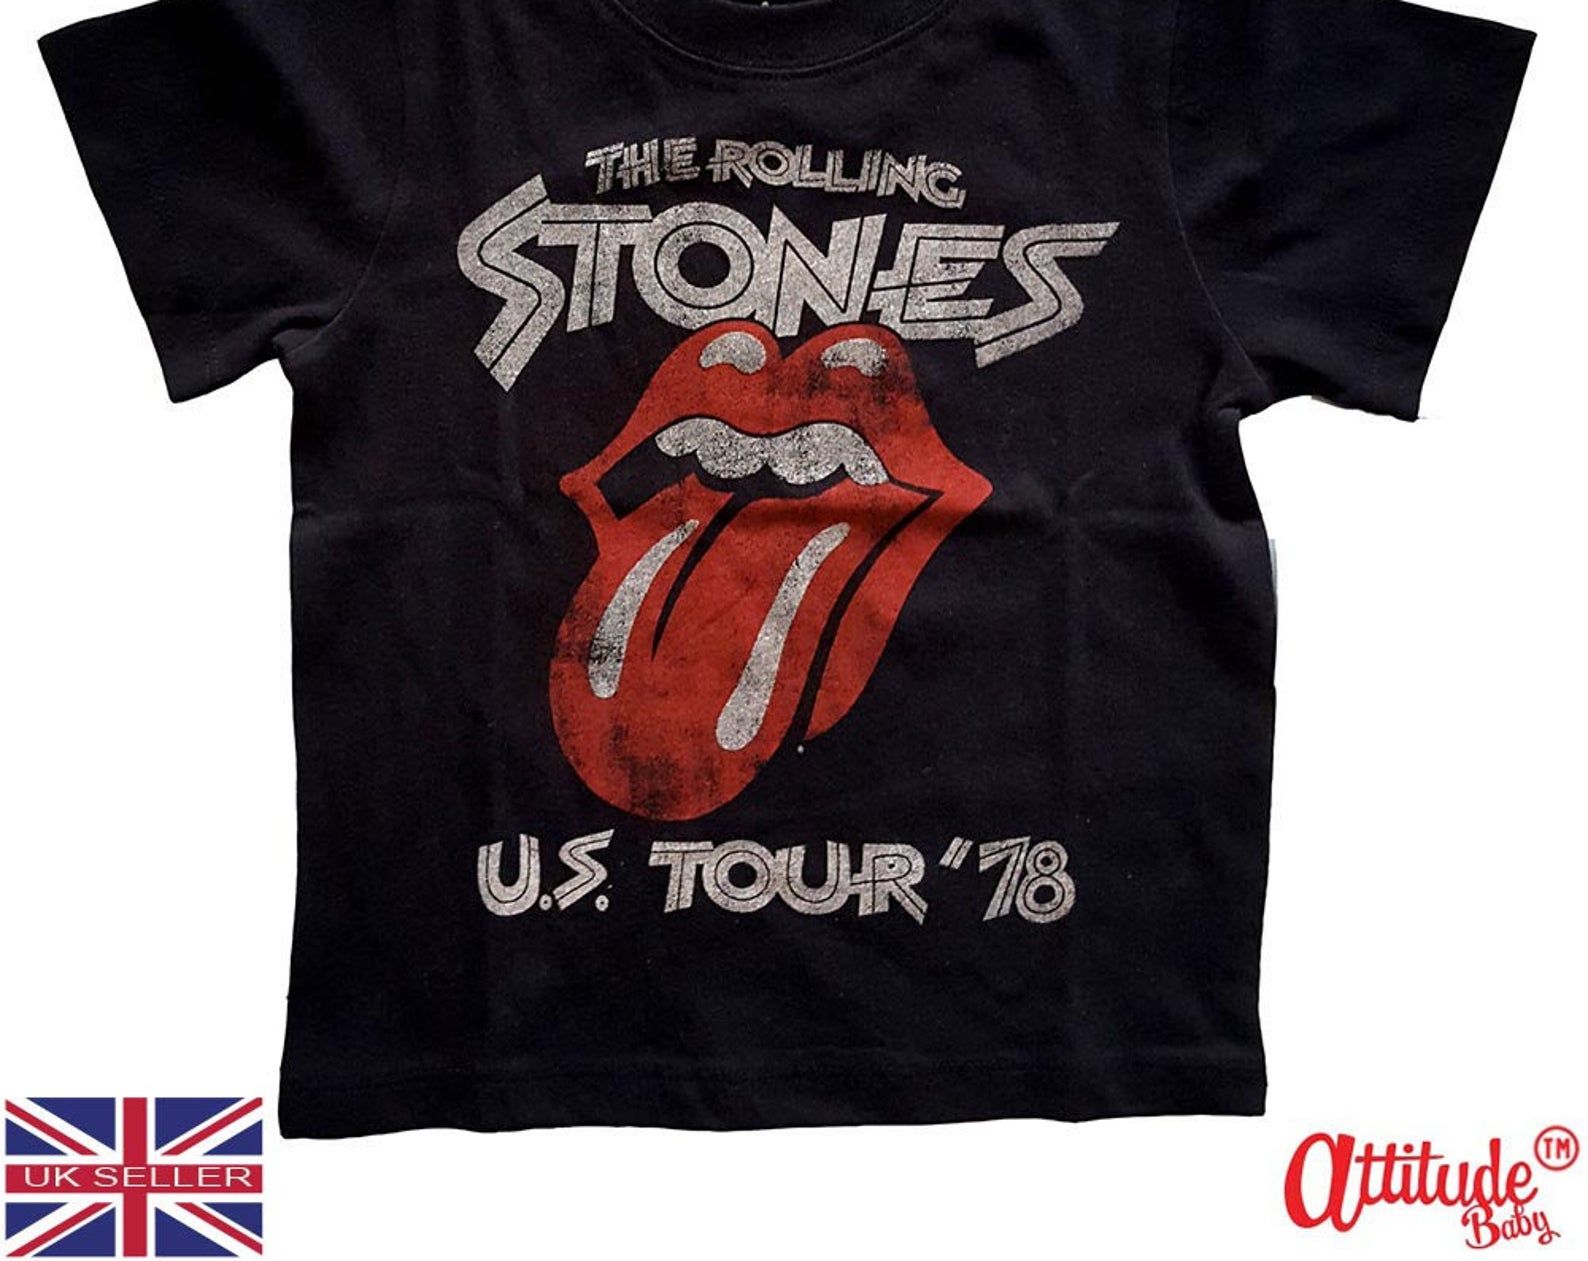 Rolling Stones T Shirts-Us Tour Tee-The Stones-Mick Jaggers Tongue ...